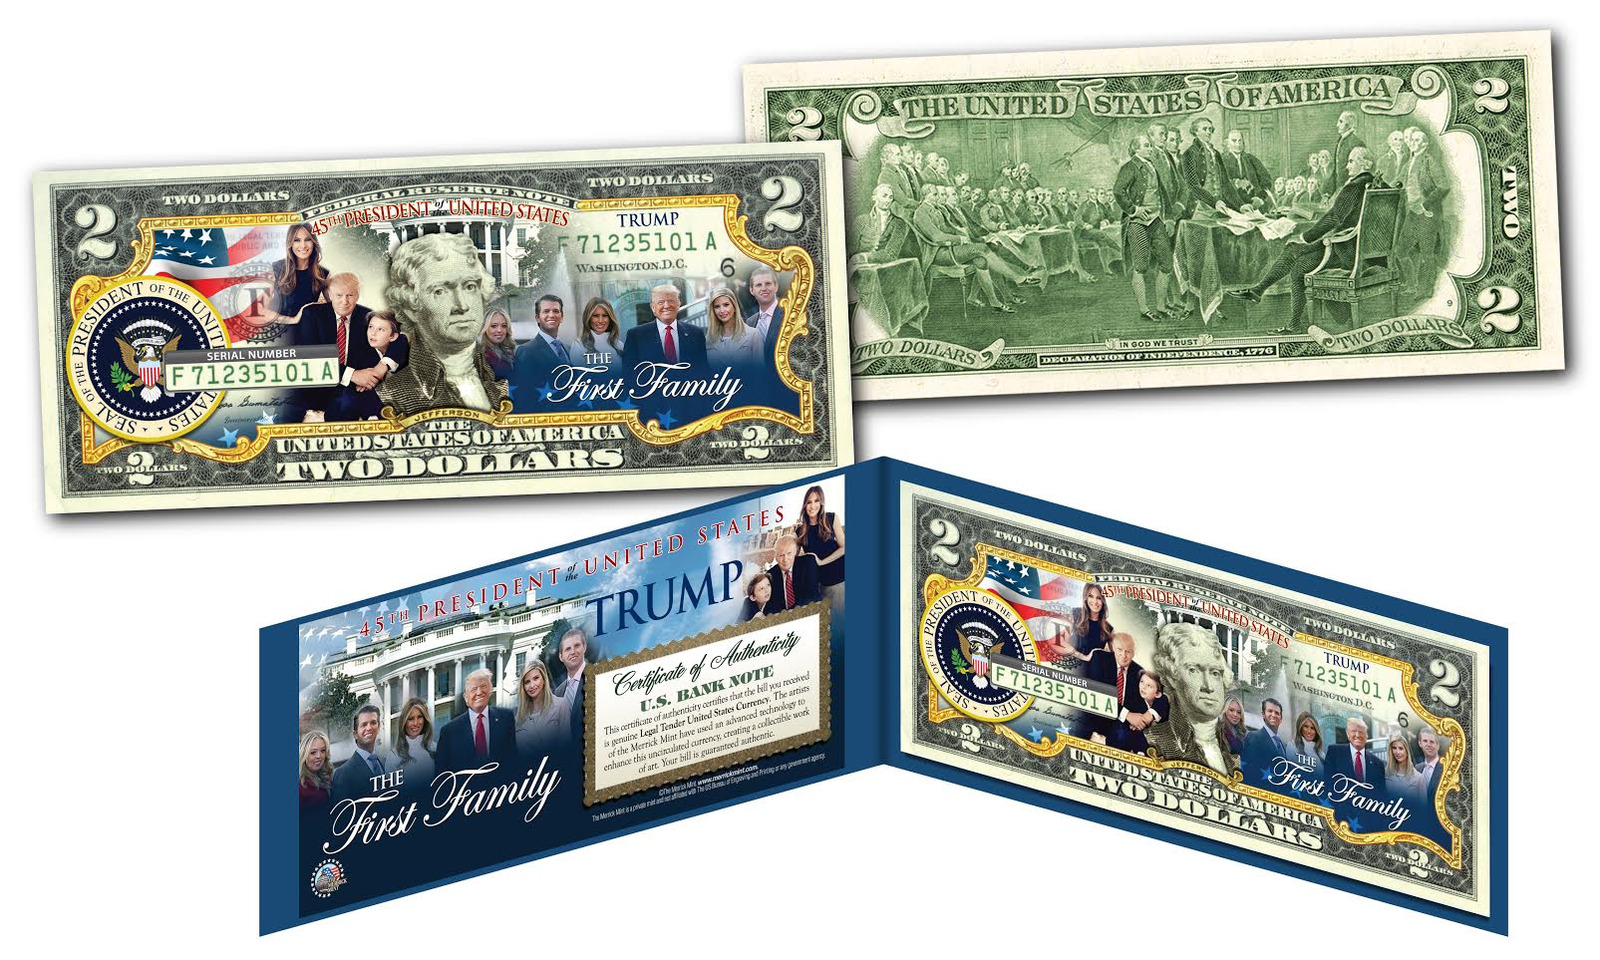 Donald Trump and The FIRST FAMILY of the United States Official Genuine $2 Bill